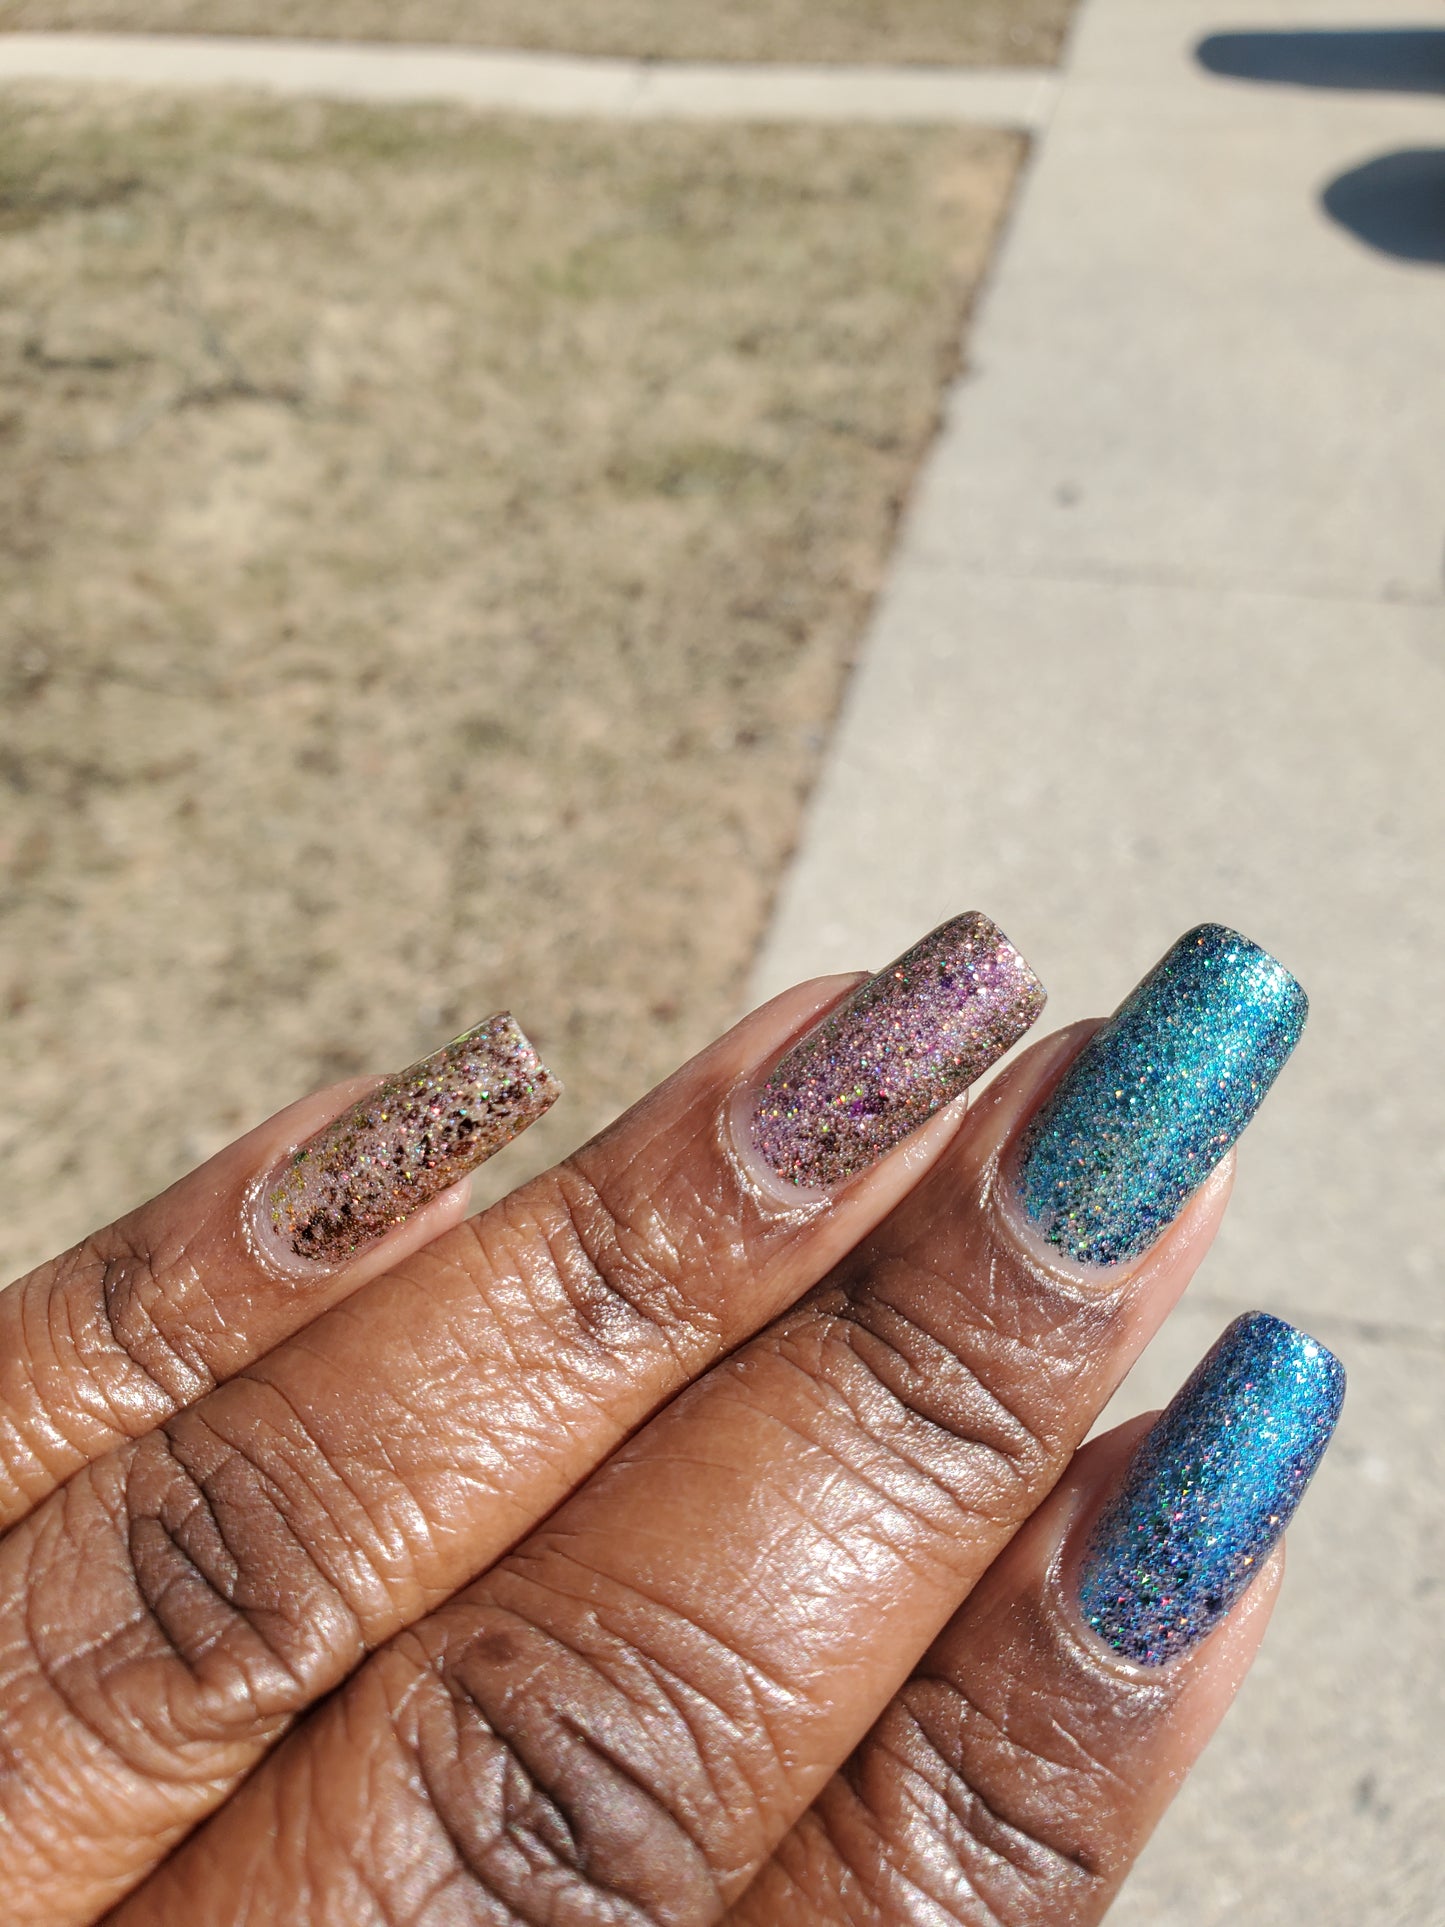 Goonies Collection - Holographic Ultra Multichrome Flakie Nail Polish